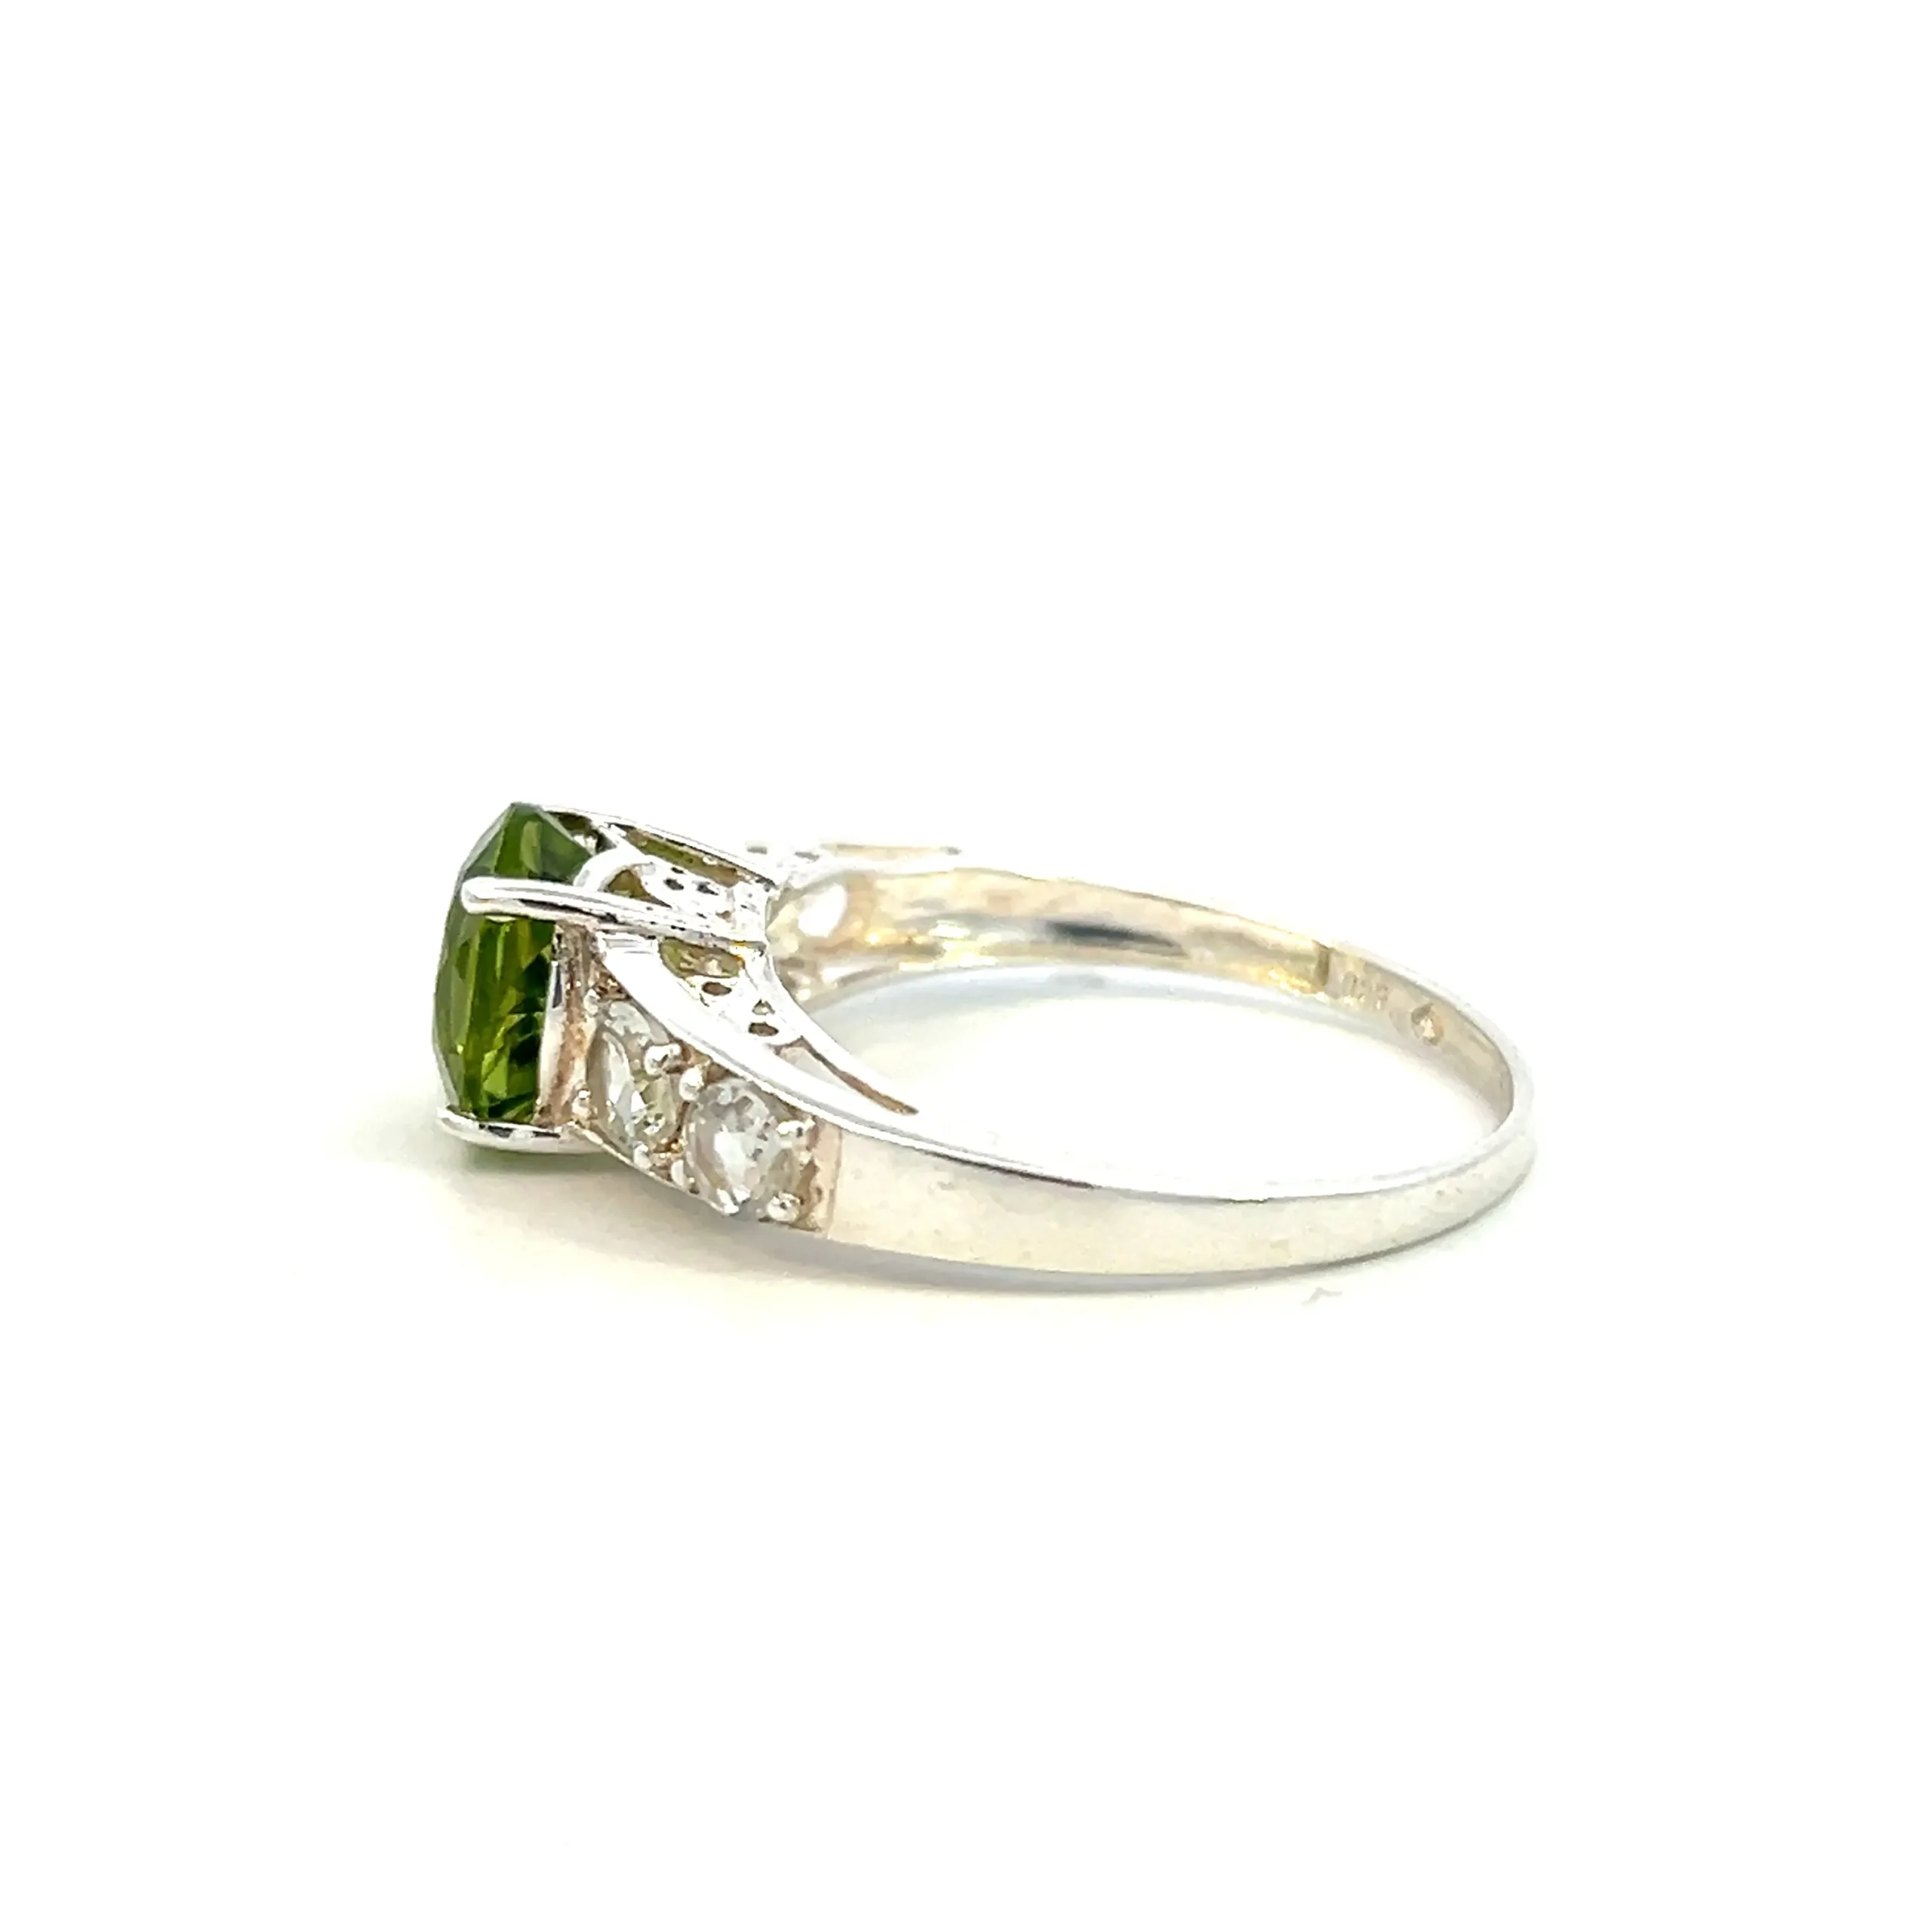 One estate sterling silver peridot ring with a round faceted peridot in a four-prong setting and 4 round faceted white quartzes with 2 channel-set in each shoulder of the ring.